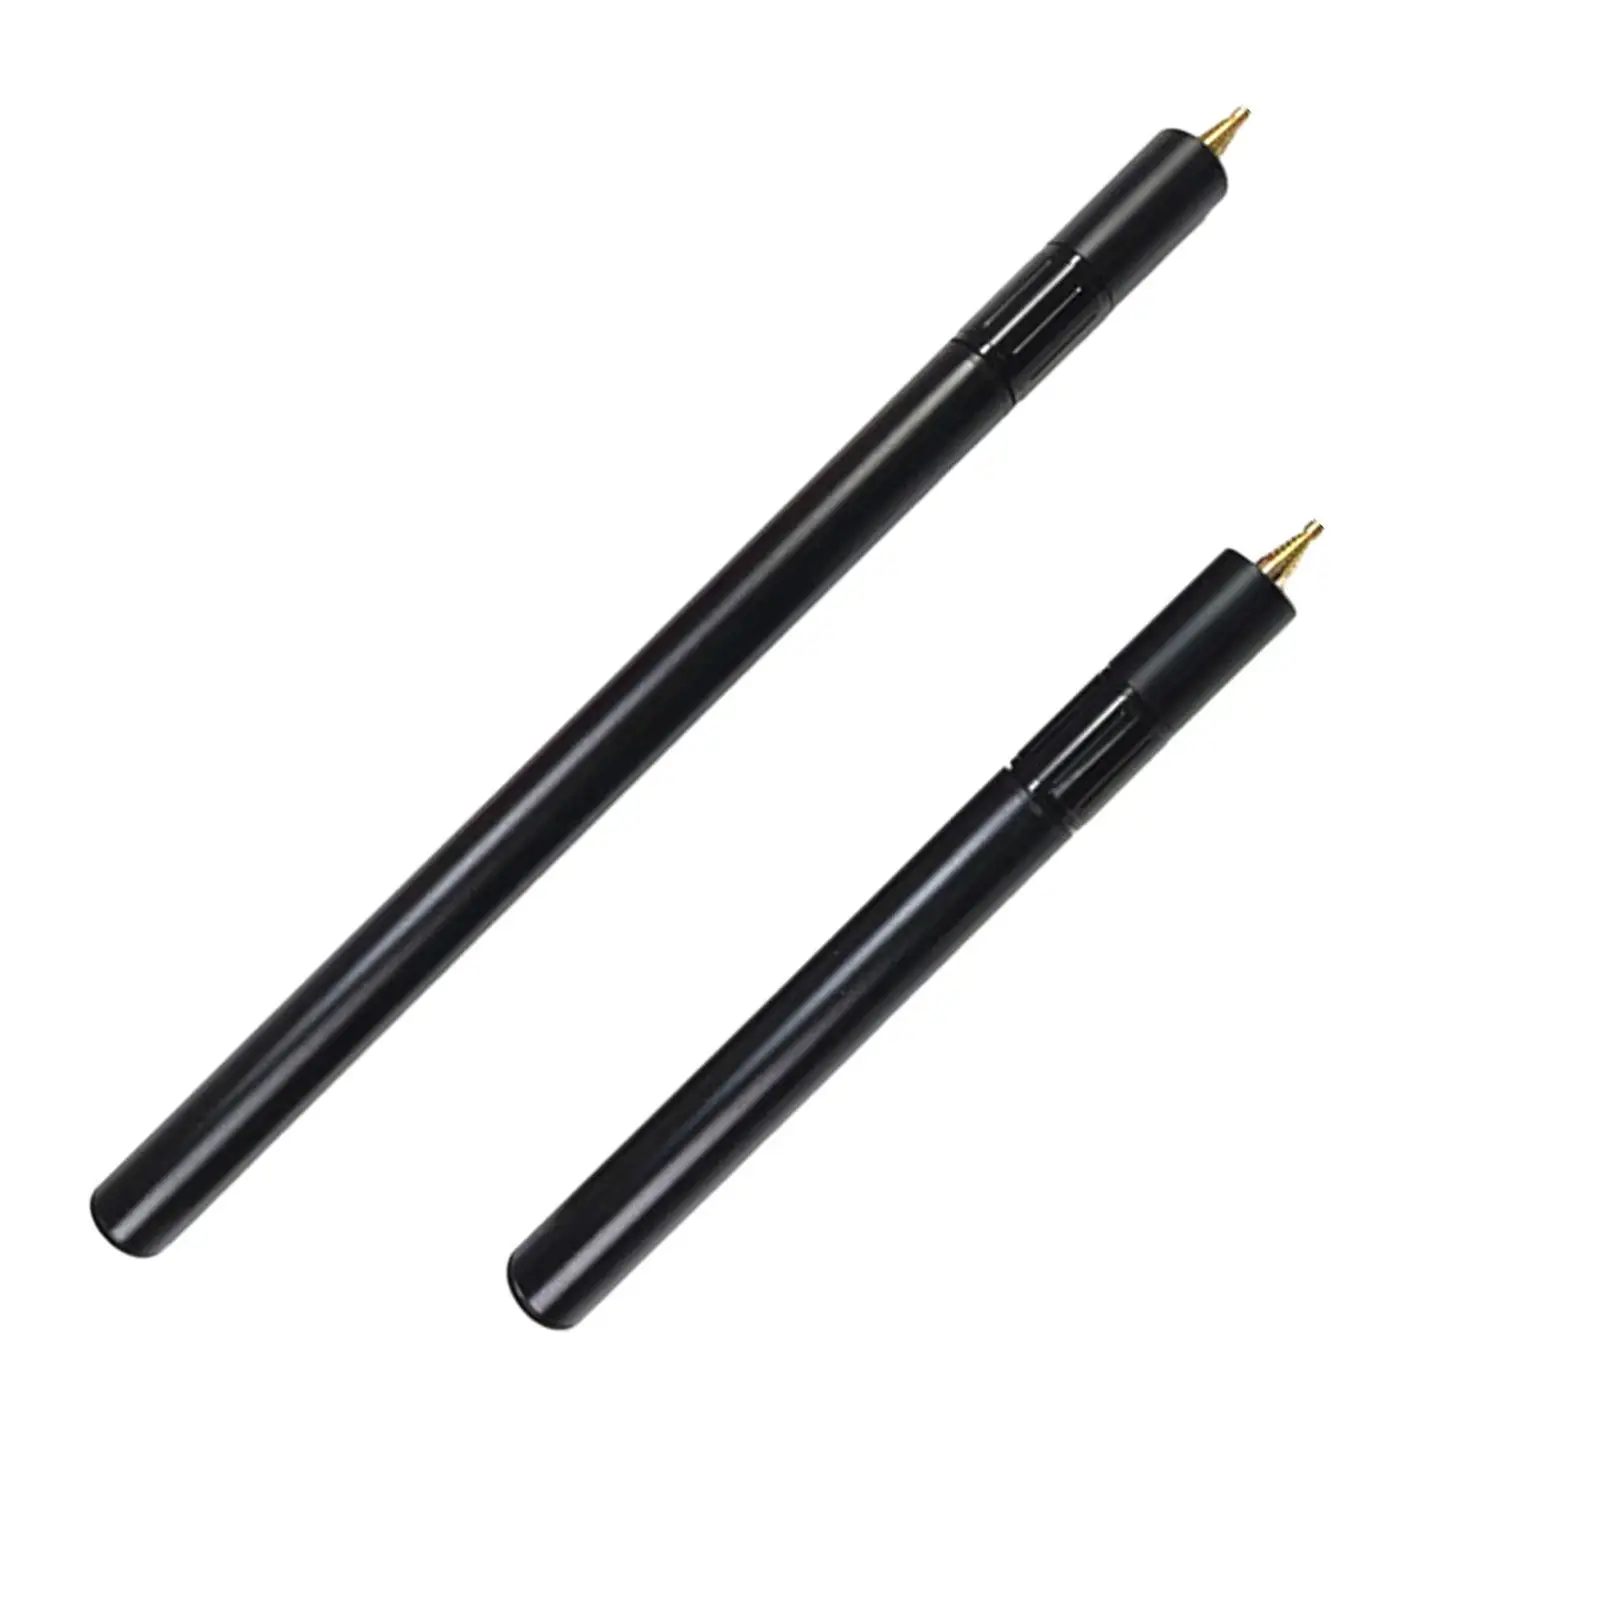 2 Pieces Billiards Snooker Cue Extension Cue End Lengthener 11inch 18inch Portable Pool Cue Extension for Billiard Beginners